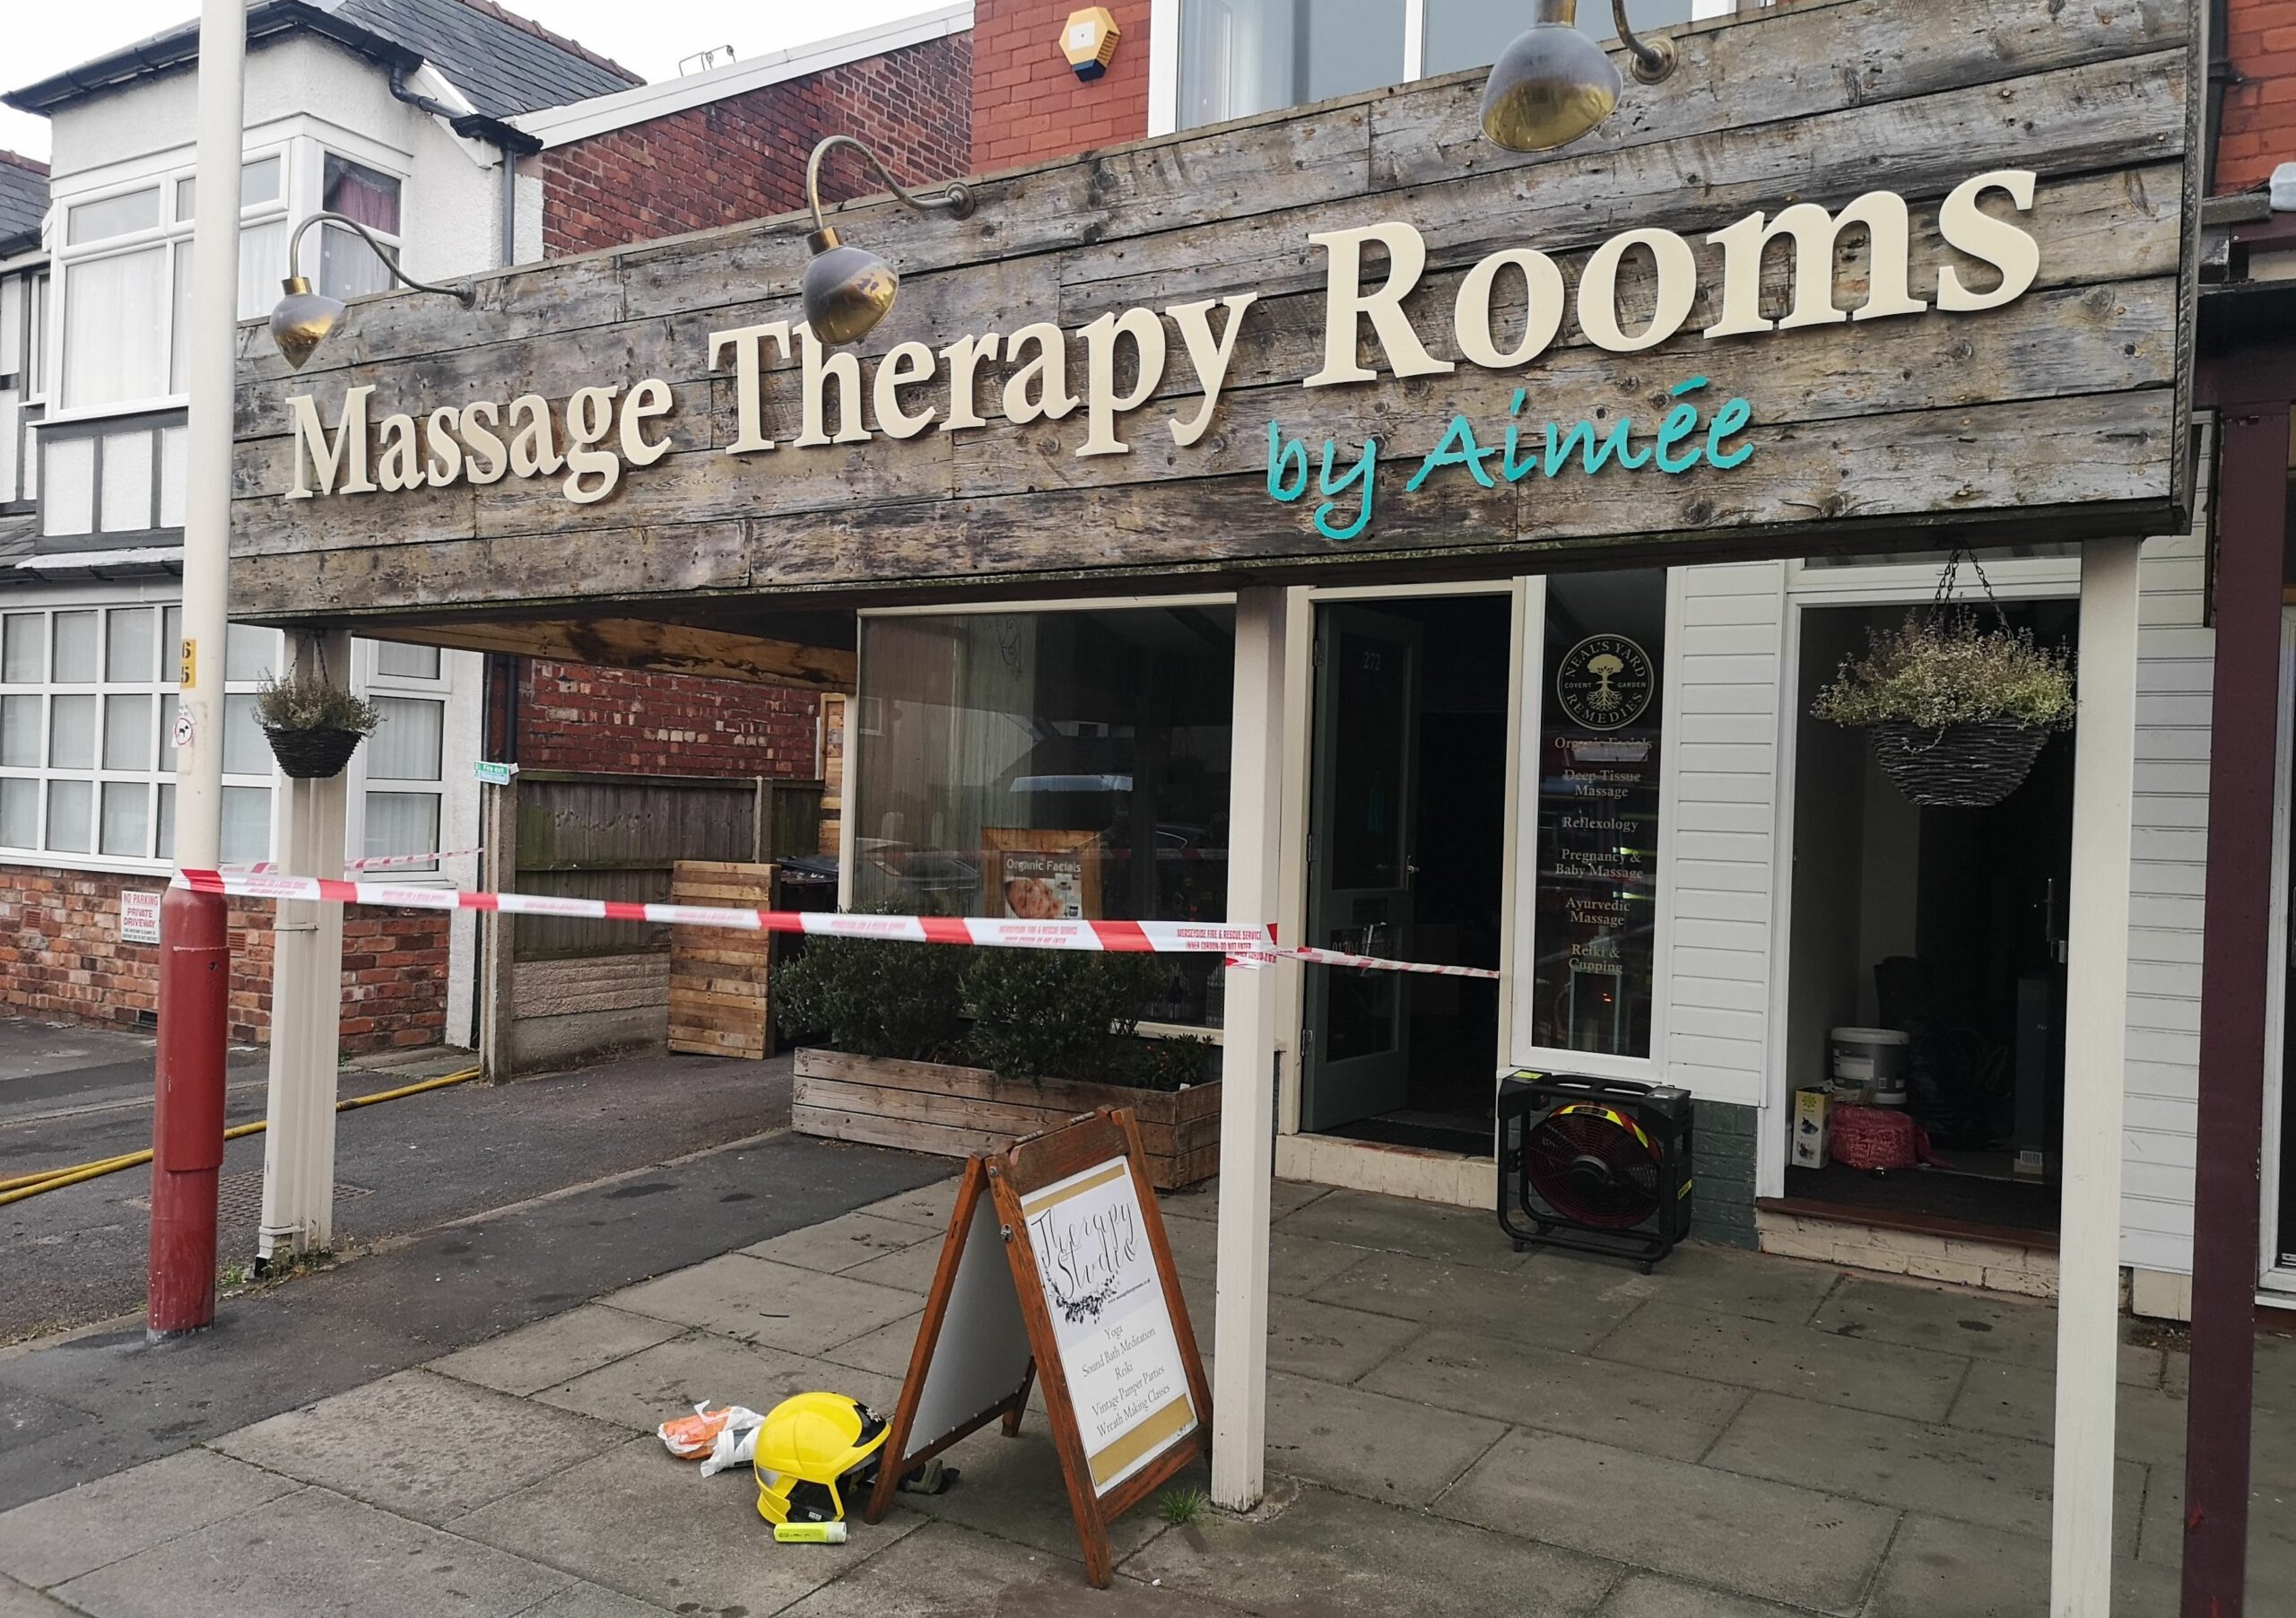 The Massage Therapy Rooms by Aimée on Liverpool Road in Birkdale in Southport is now open again after a devastating fire in April. The scene after the blaze